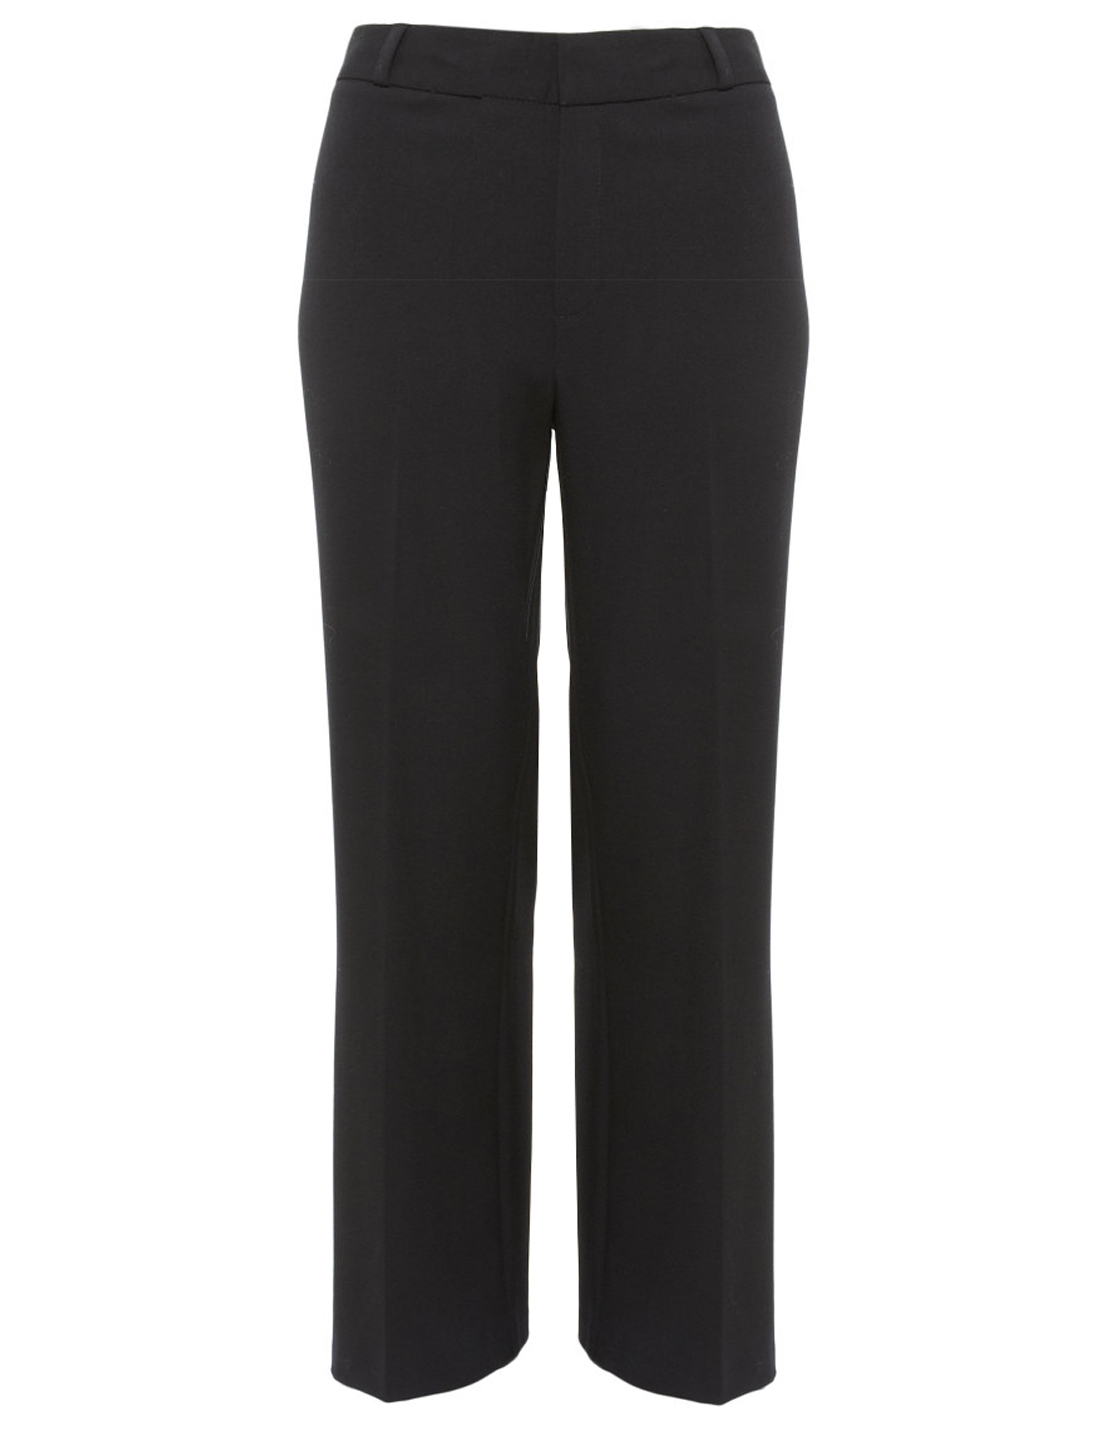 Marks and Spencer - - M&5 BLACK Wide Leg Trousers - Size 8 to 22